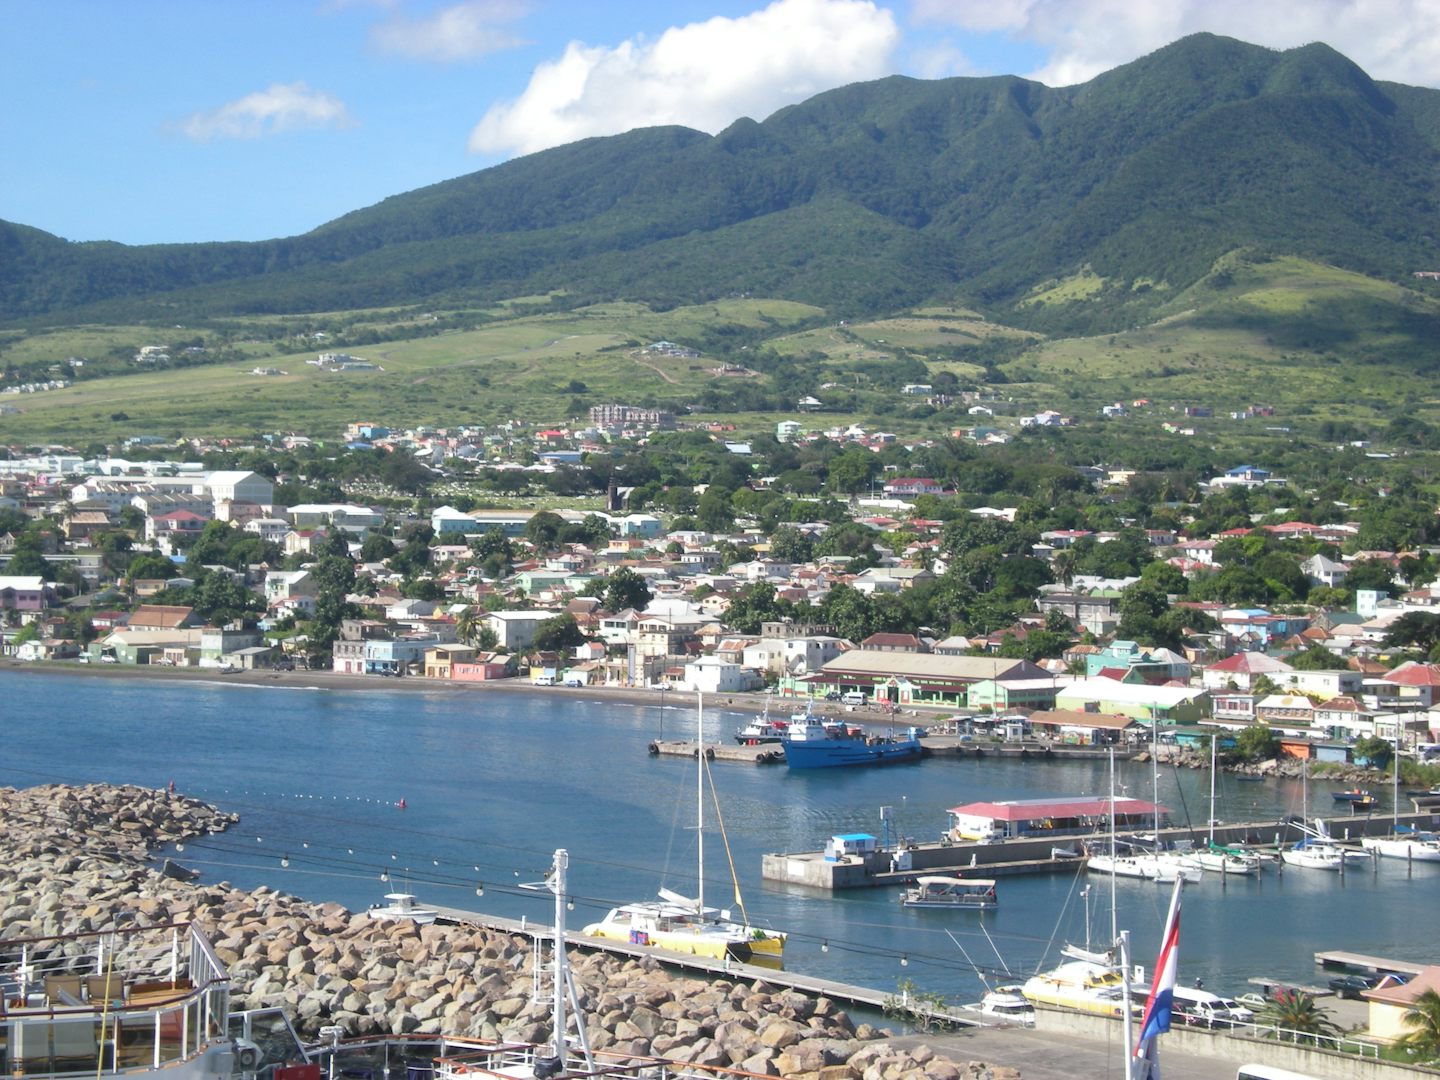 At cruise ship terminal in Basseterre, St. Kitts, a beautiful country.